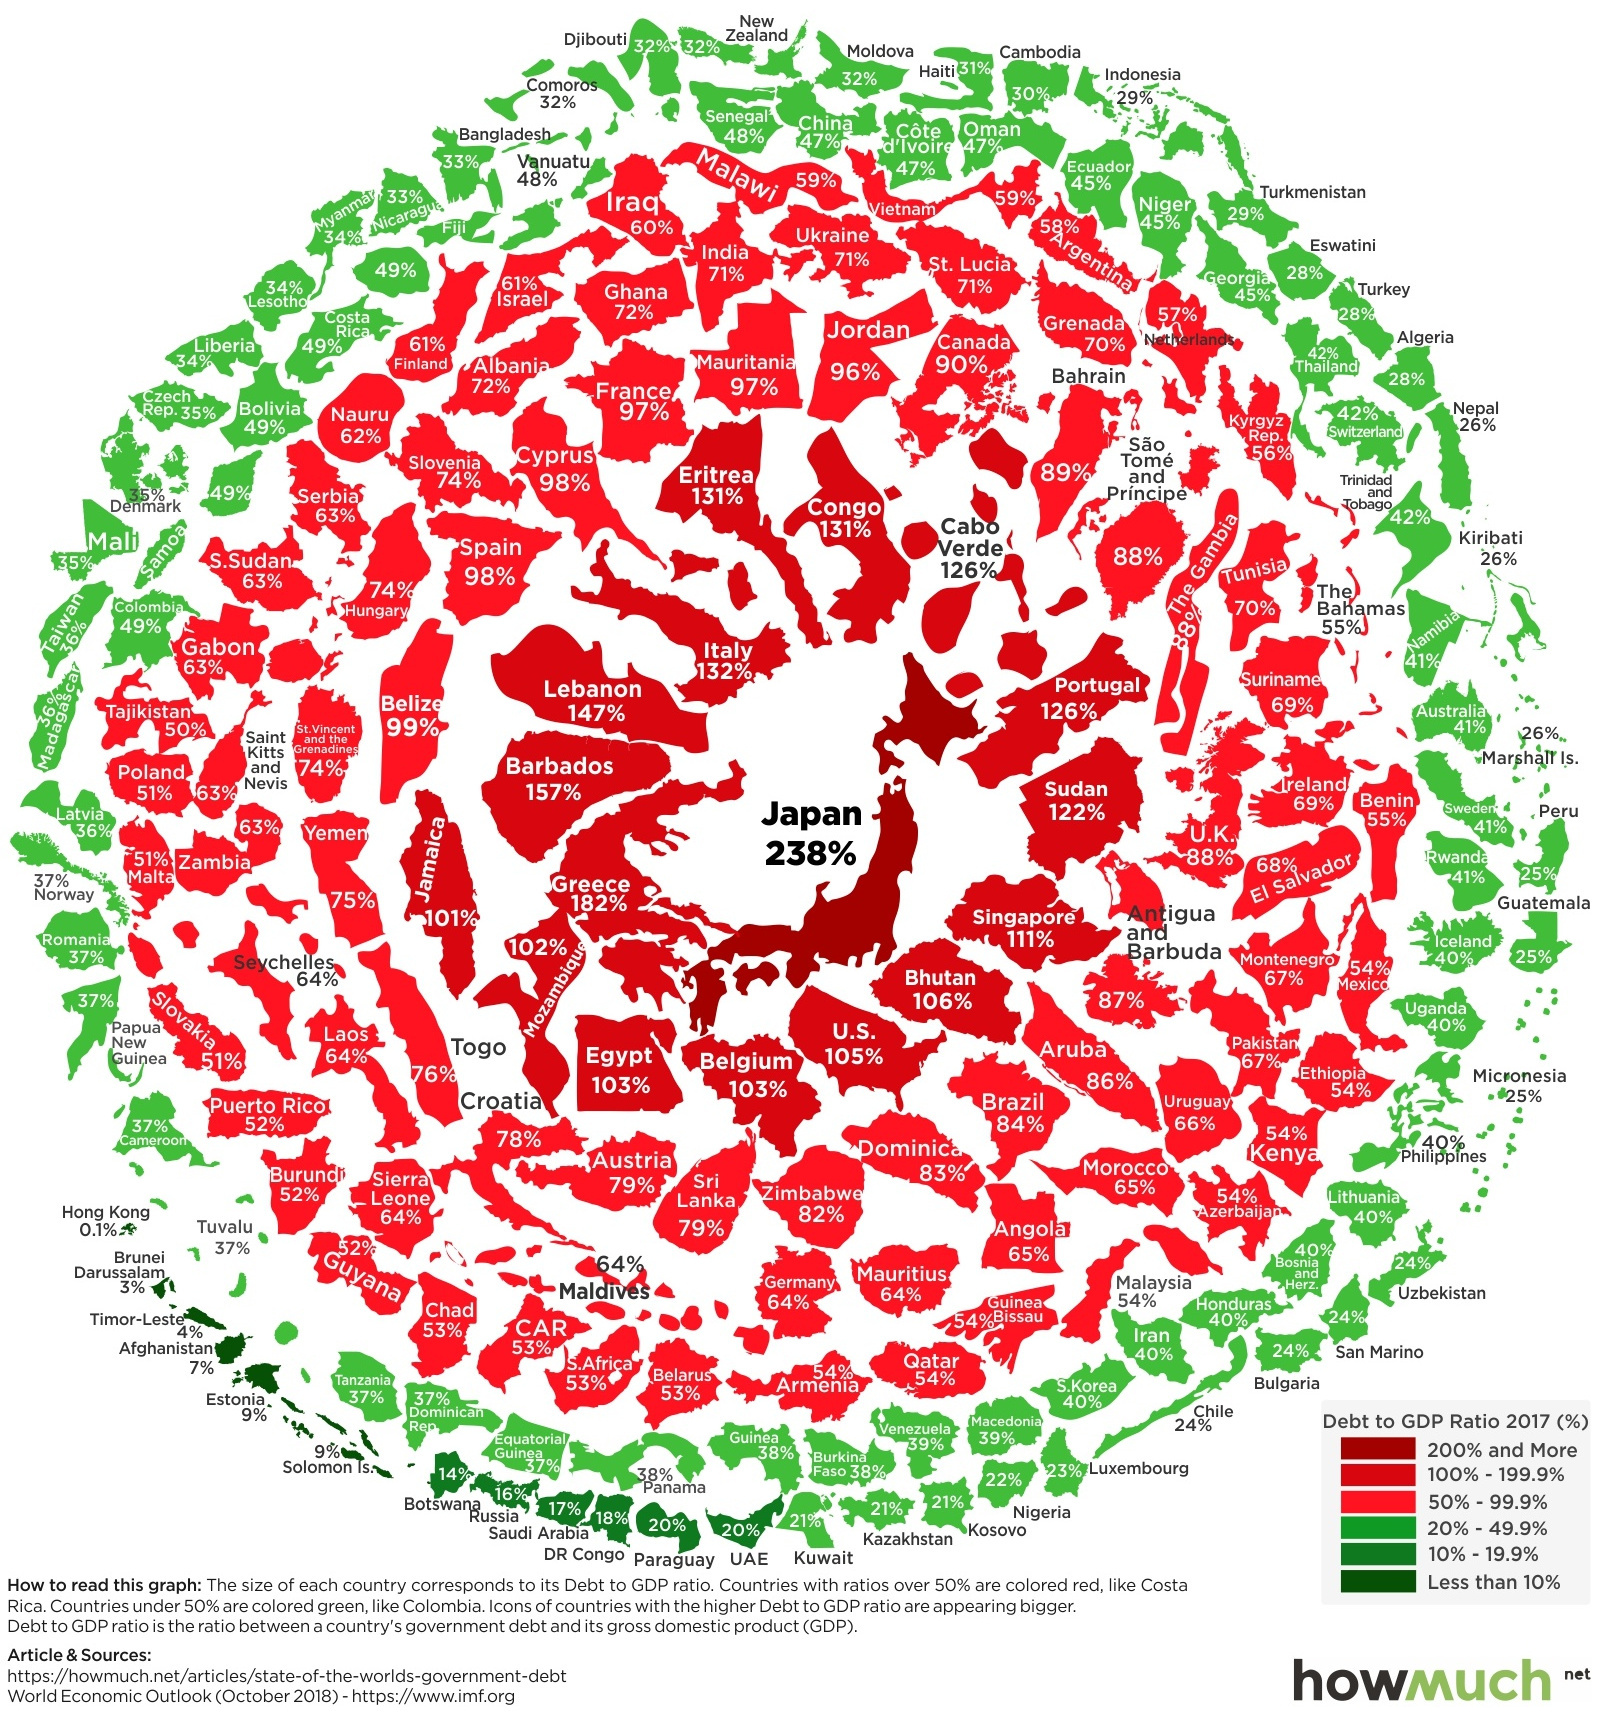 Visualizing the Snowball of Government Debt